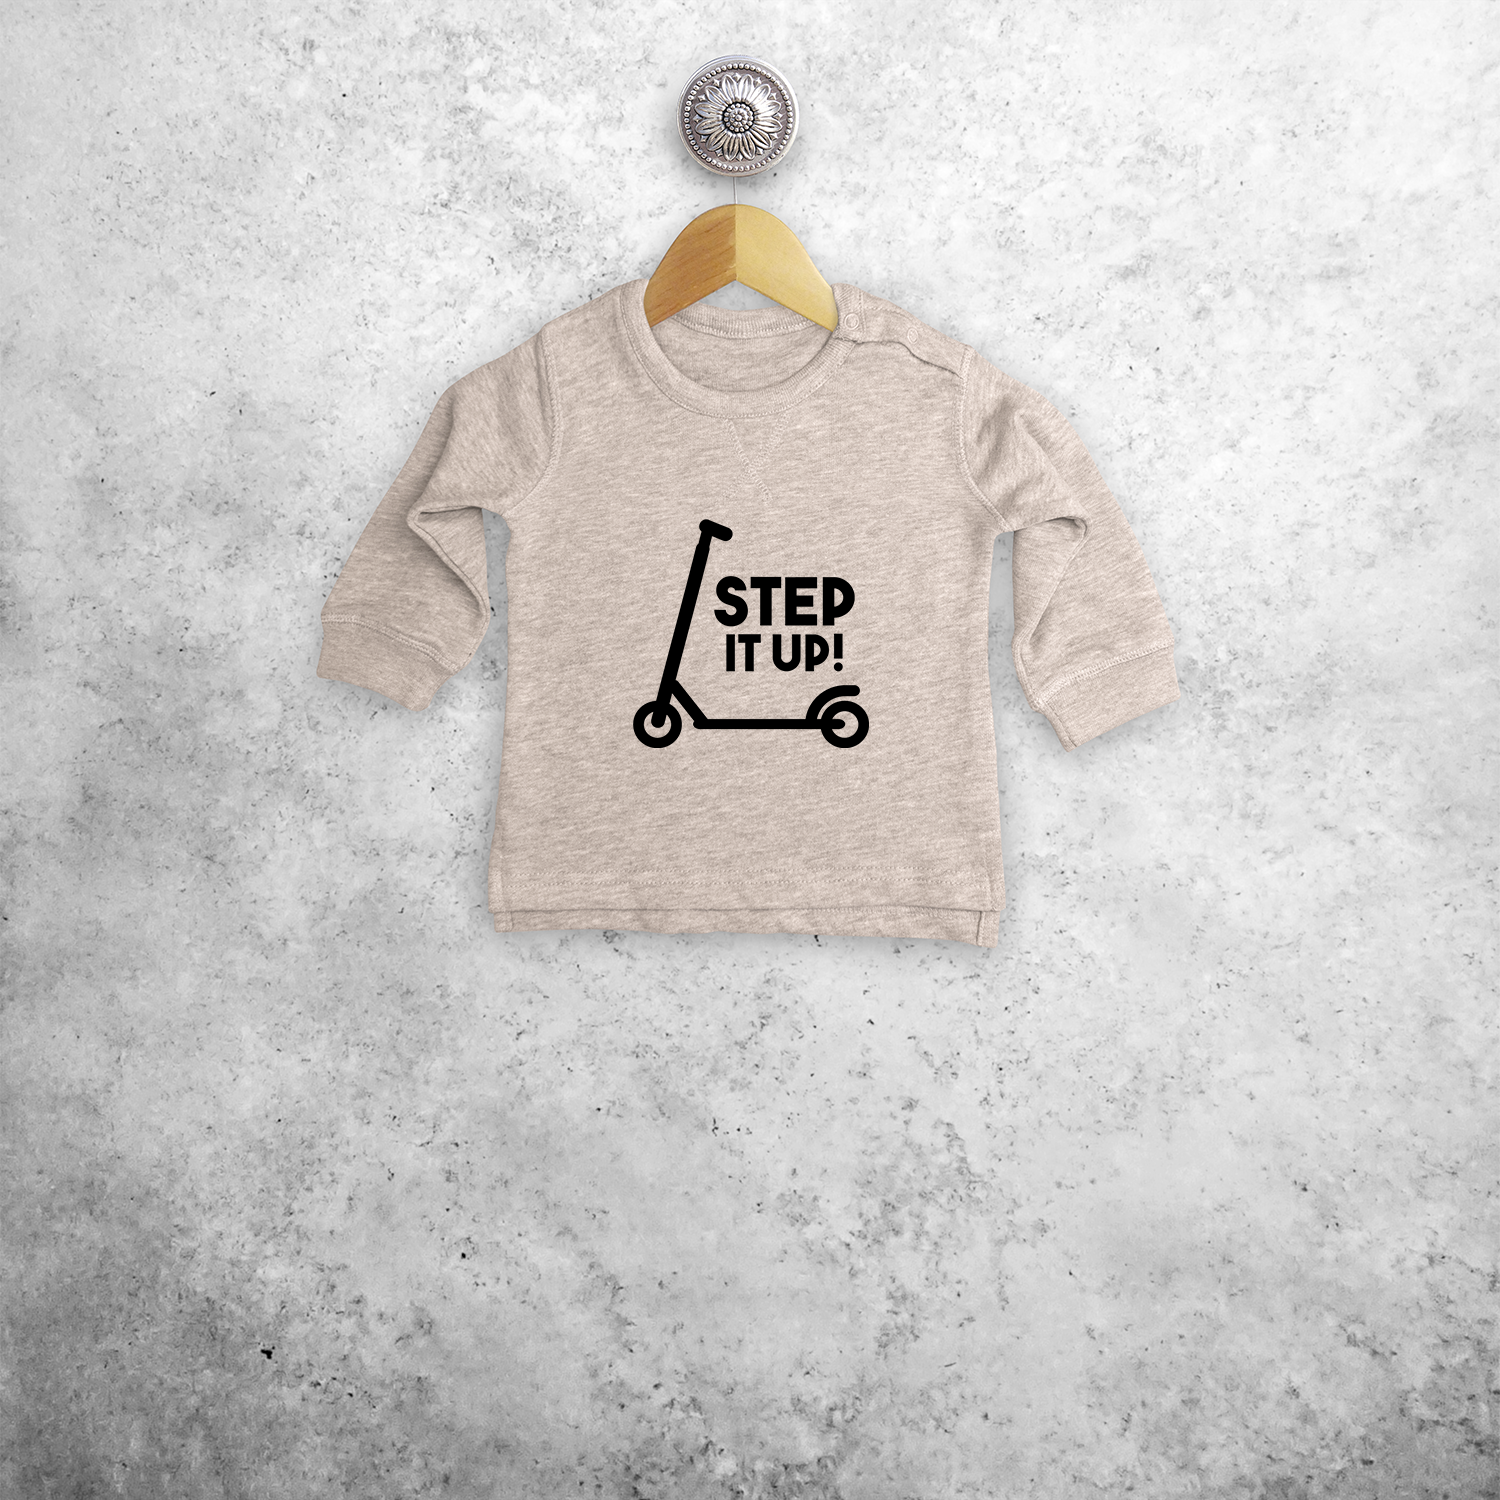 'Step it up' baby sweater